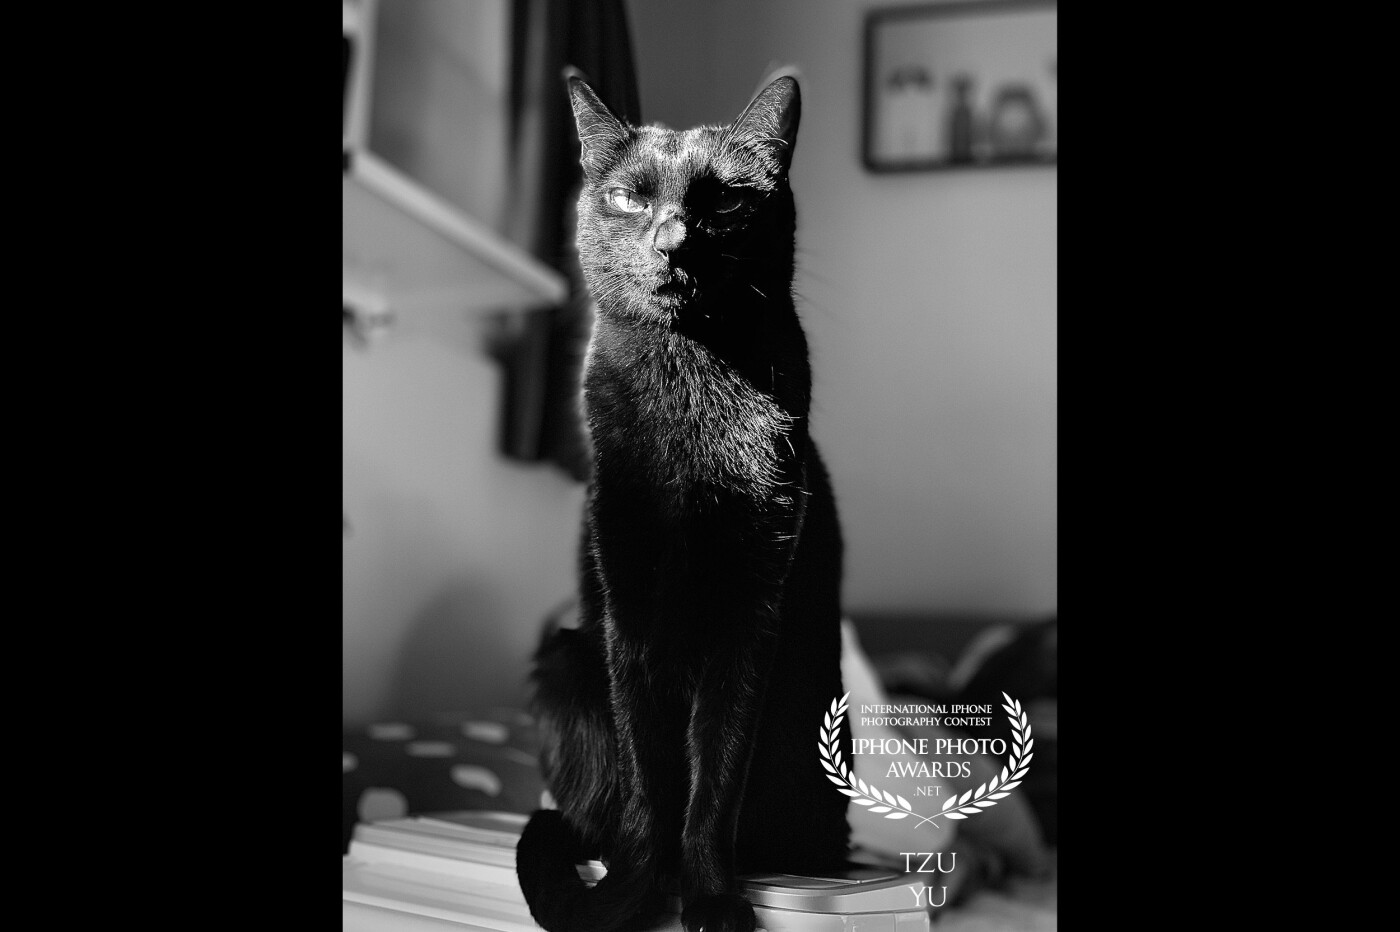 This photography is of a cat that I have kept for almost 9 years. It is actually a black cat. It is born with a body that does not eat fat. Under the sunshine one afternoon, the black and white light and shadow make me want to record that moment.